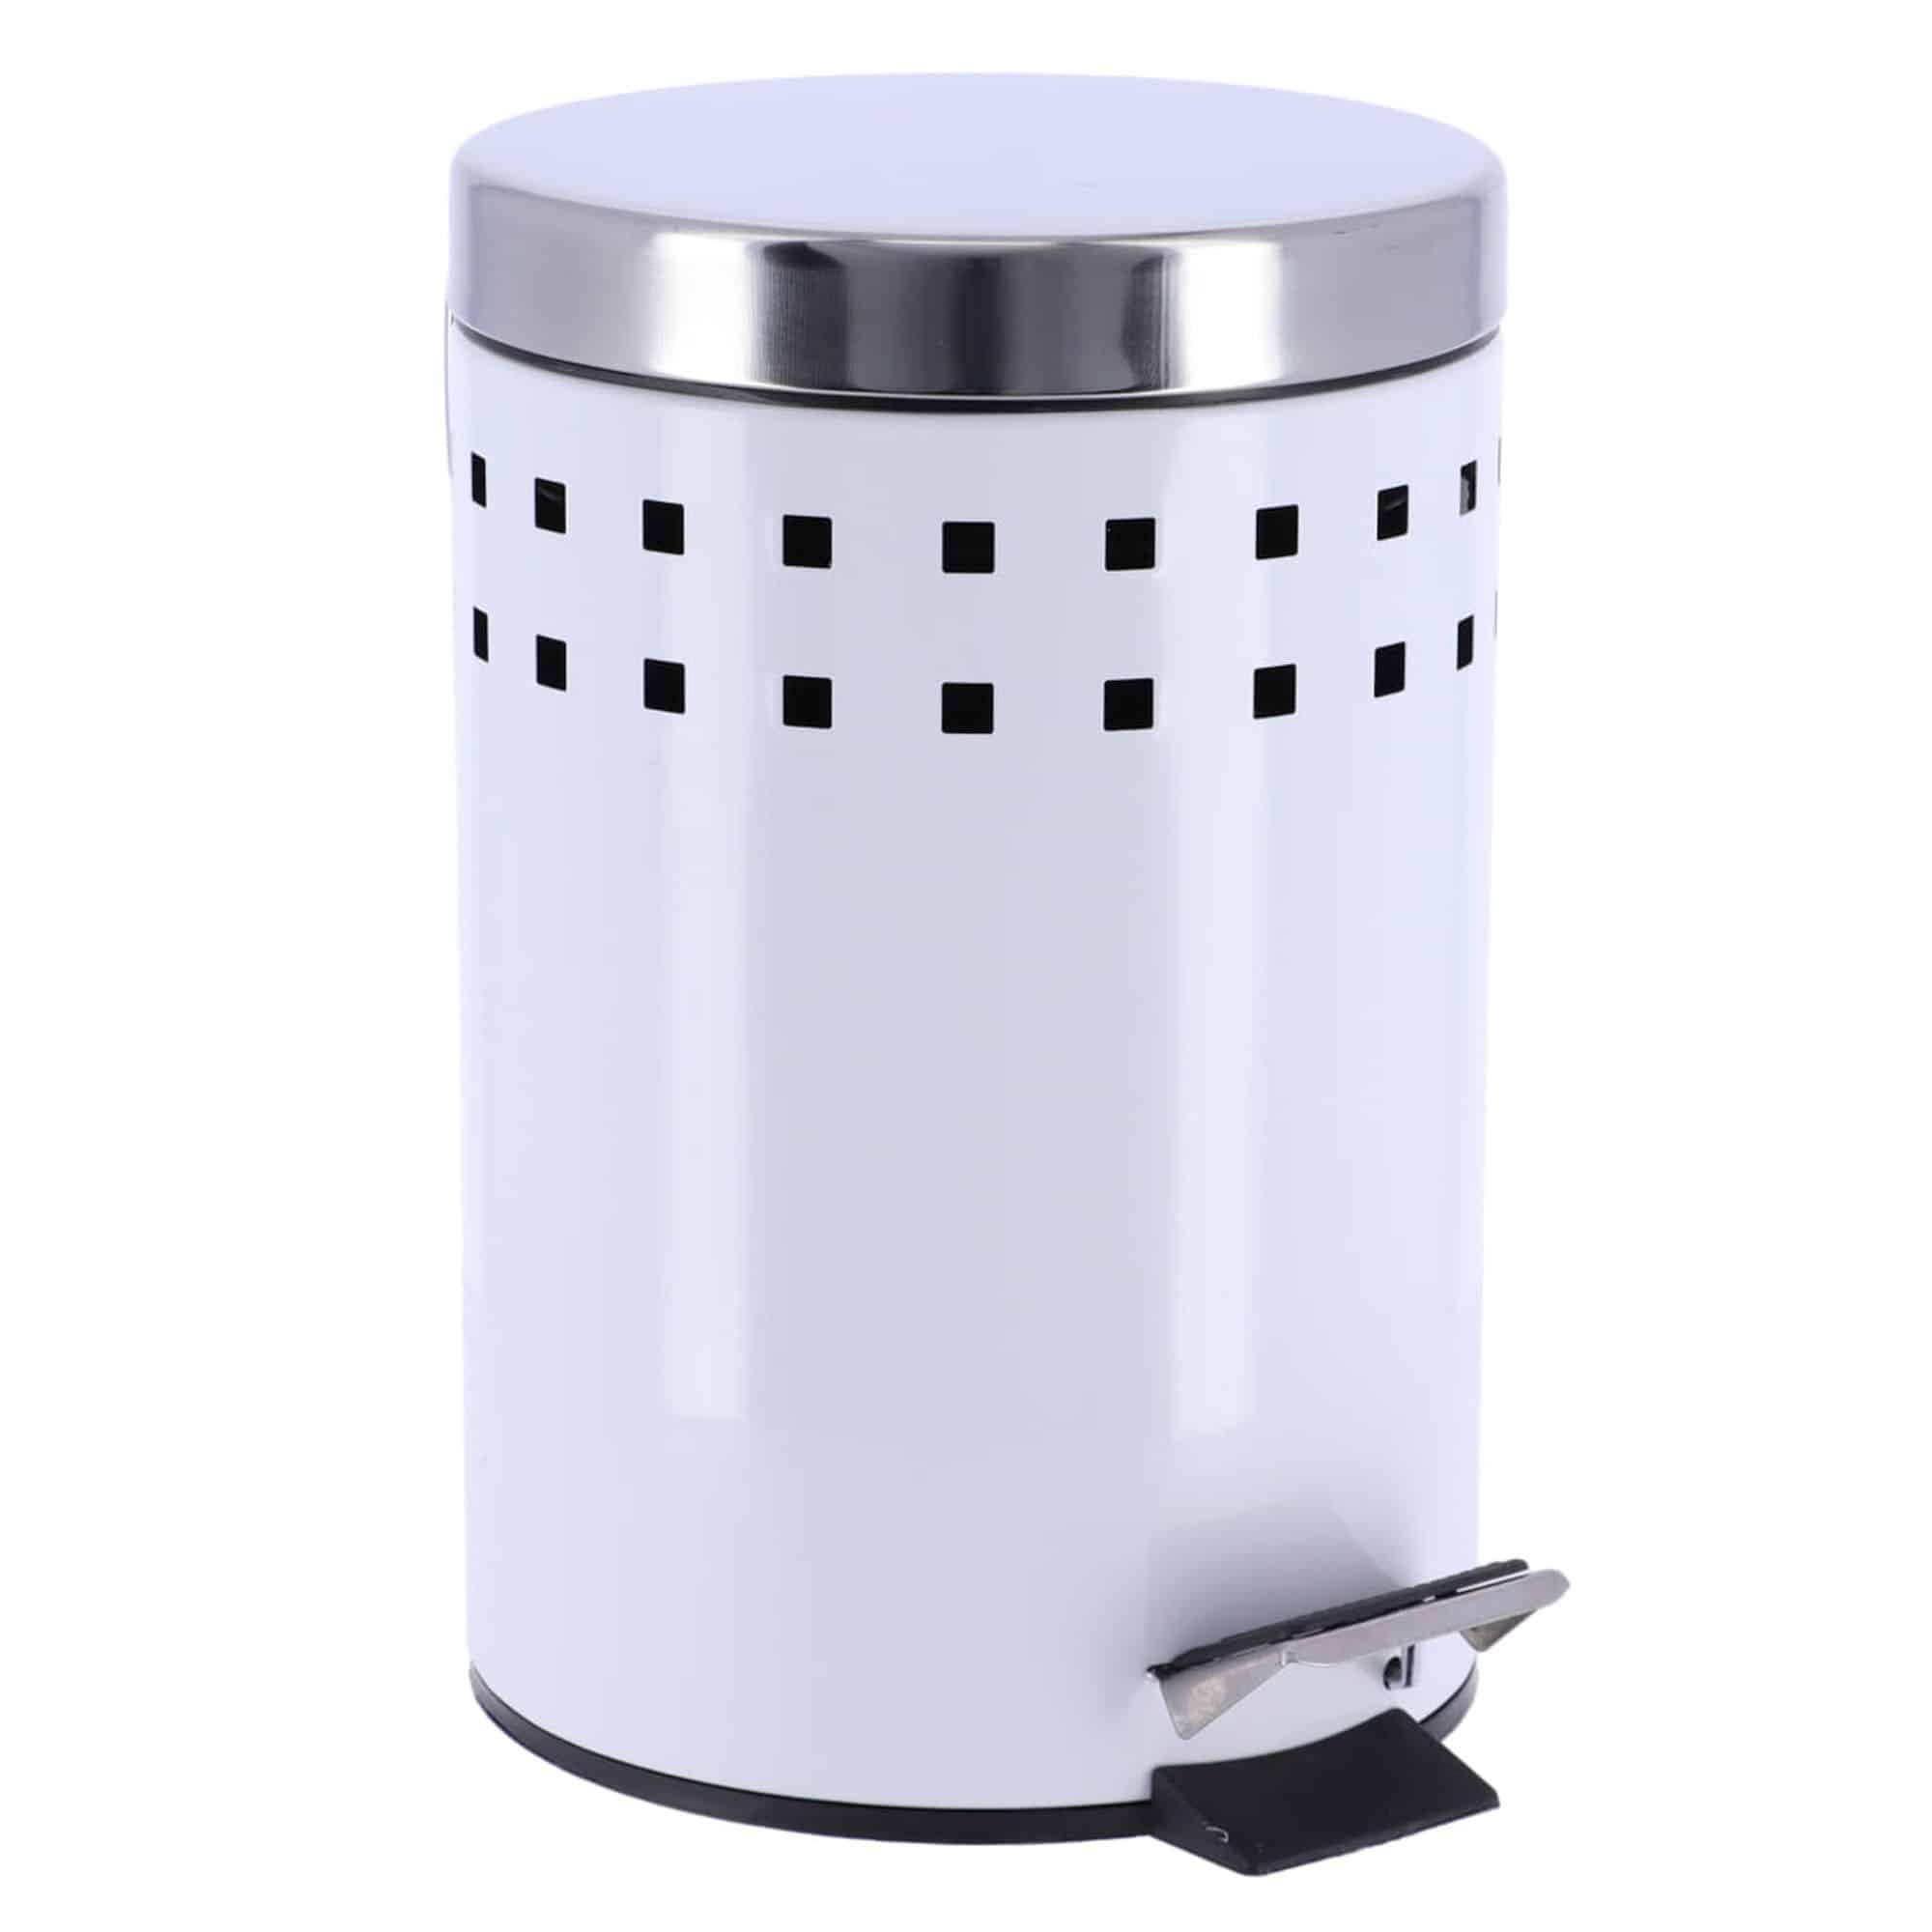 https://evideco.com/wp-content/uploads/2018/09/6502100-White-Round-Metal-Small-Step-Trash-Can-with-Lid-Waste-Bin-3-liters-0.8-gal-1-MAIN.jpg